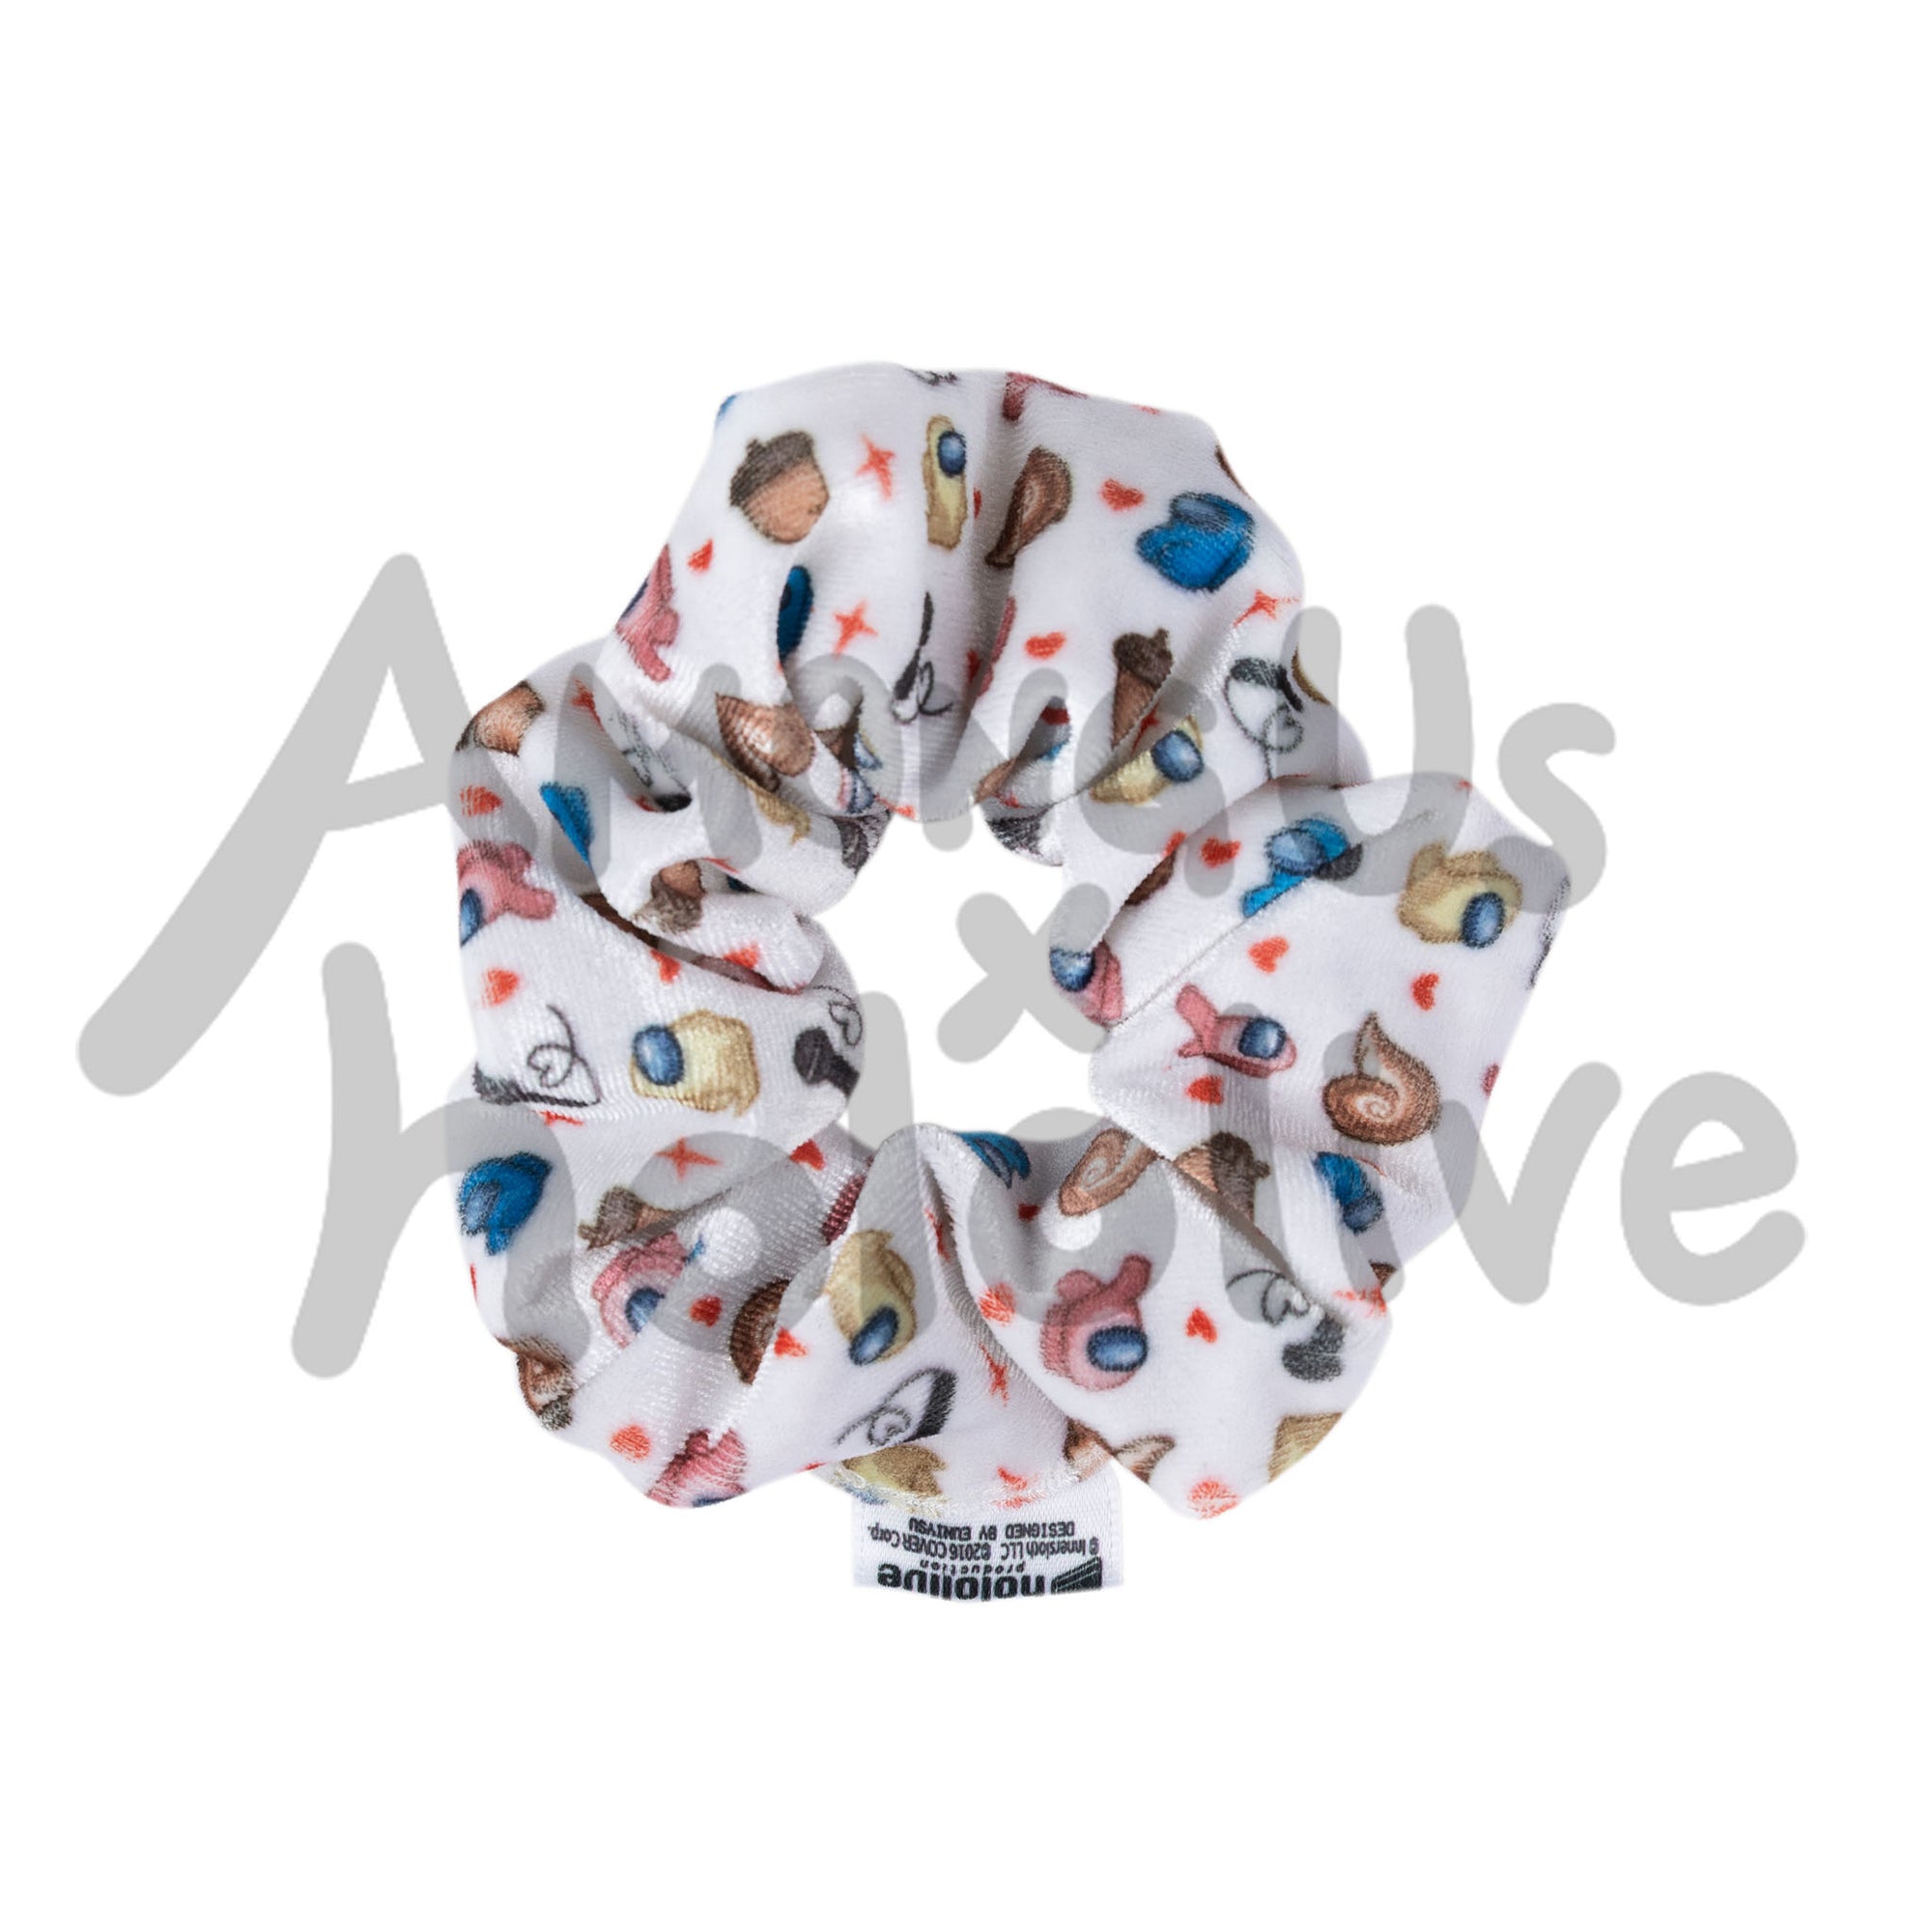 A product photo of a white scrunchie with small printed designs. The pattern shows rose, banana, and blue crewmates among acorns, snakes, small red hears, and red impostor shines.